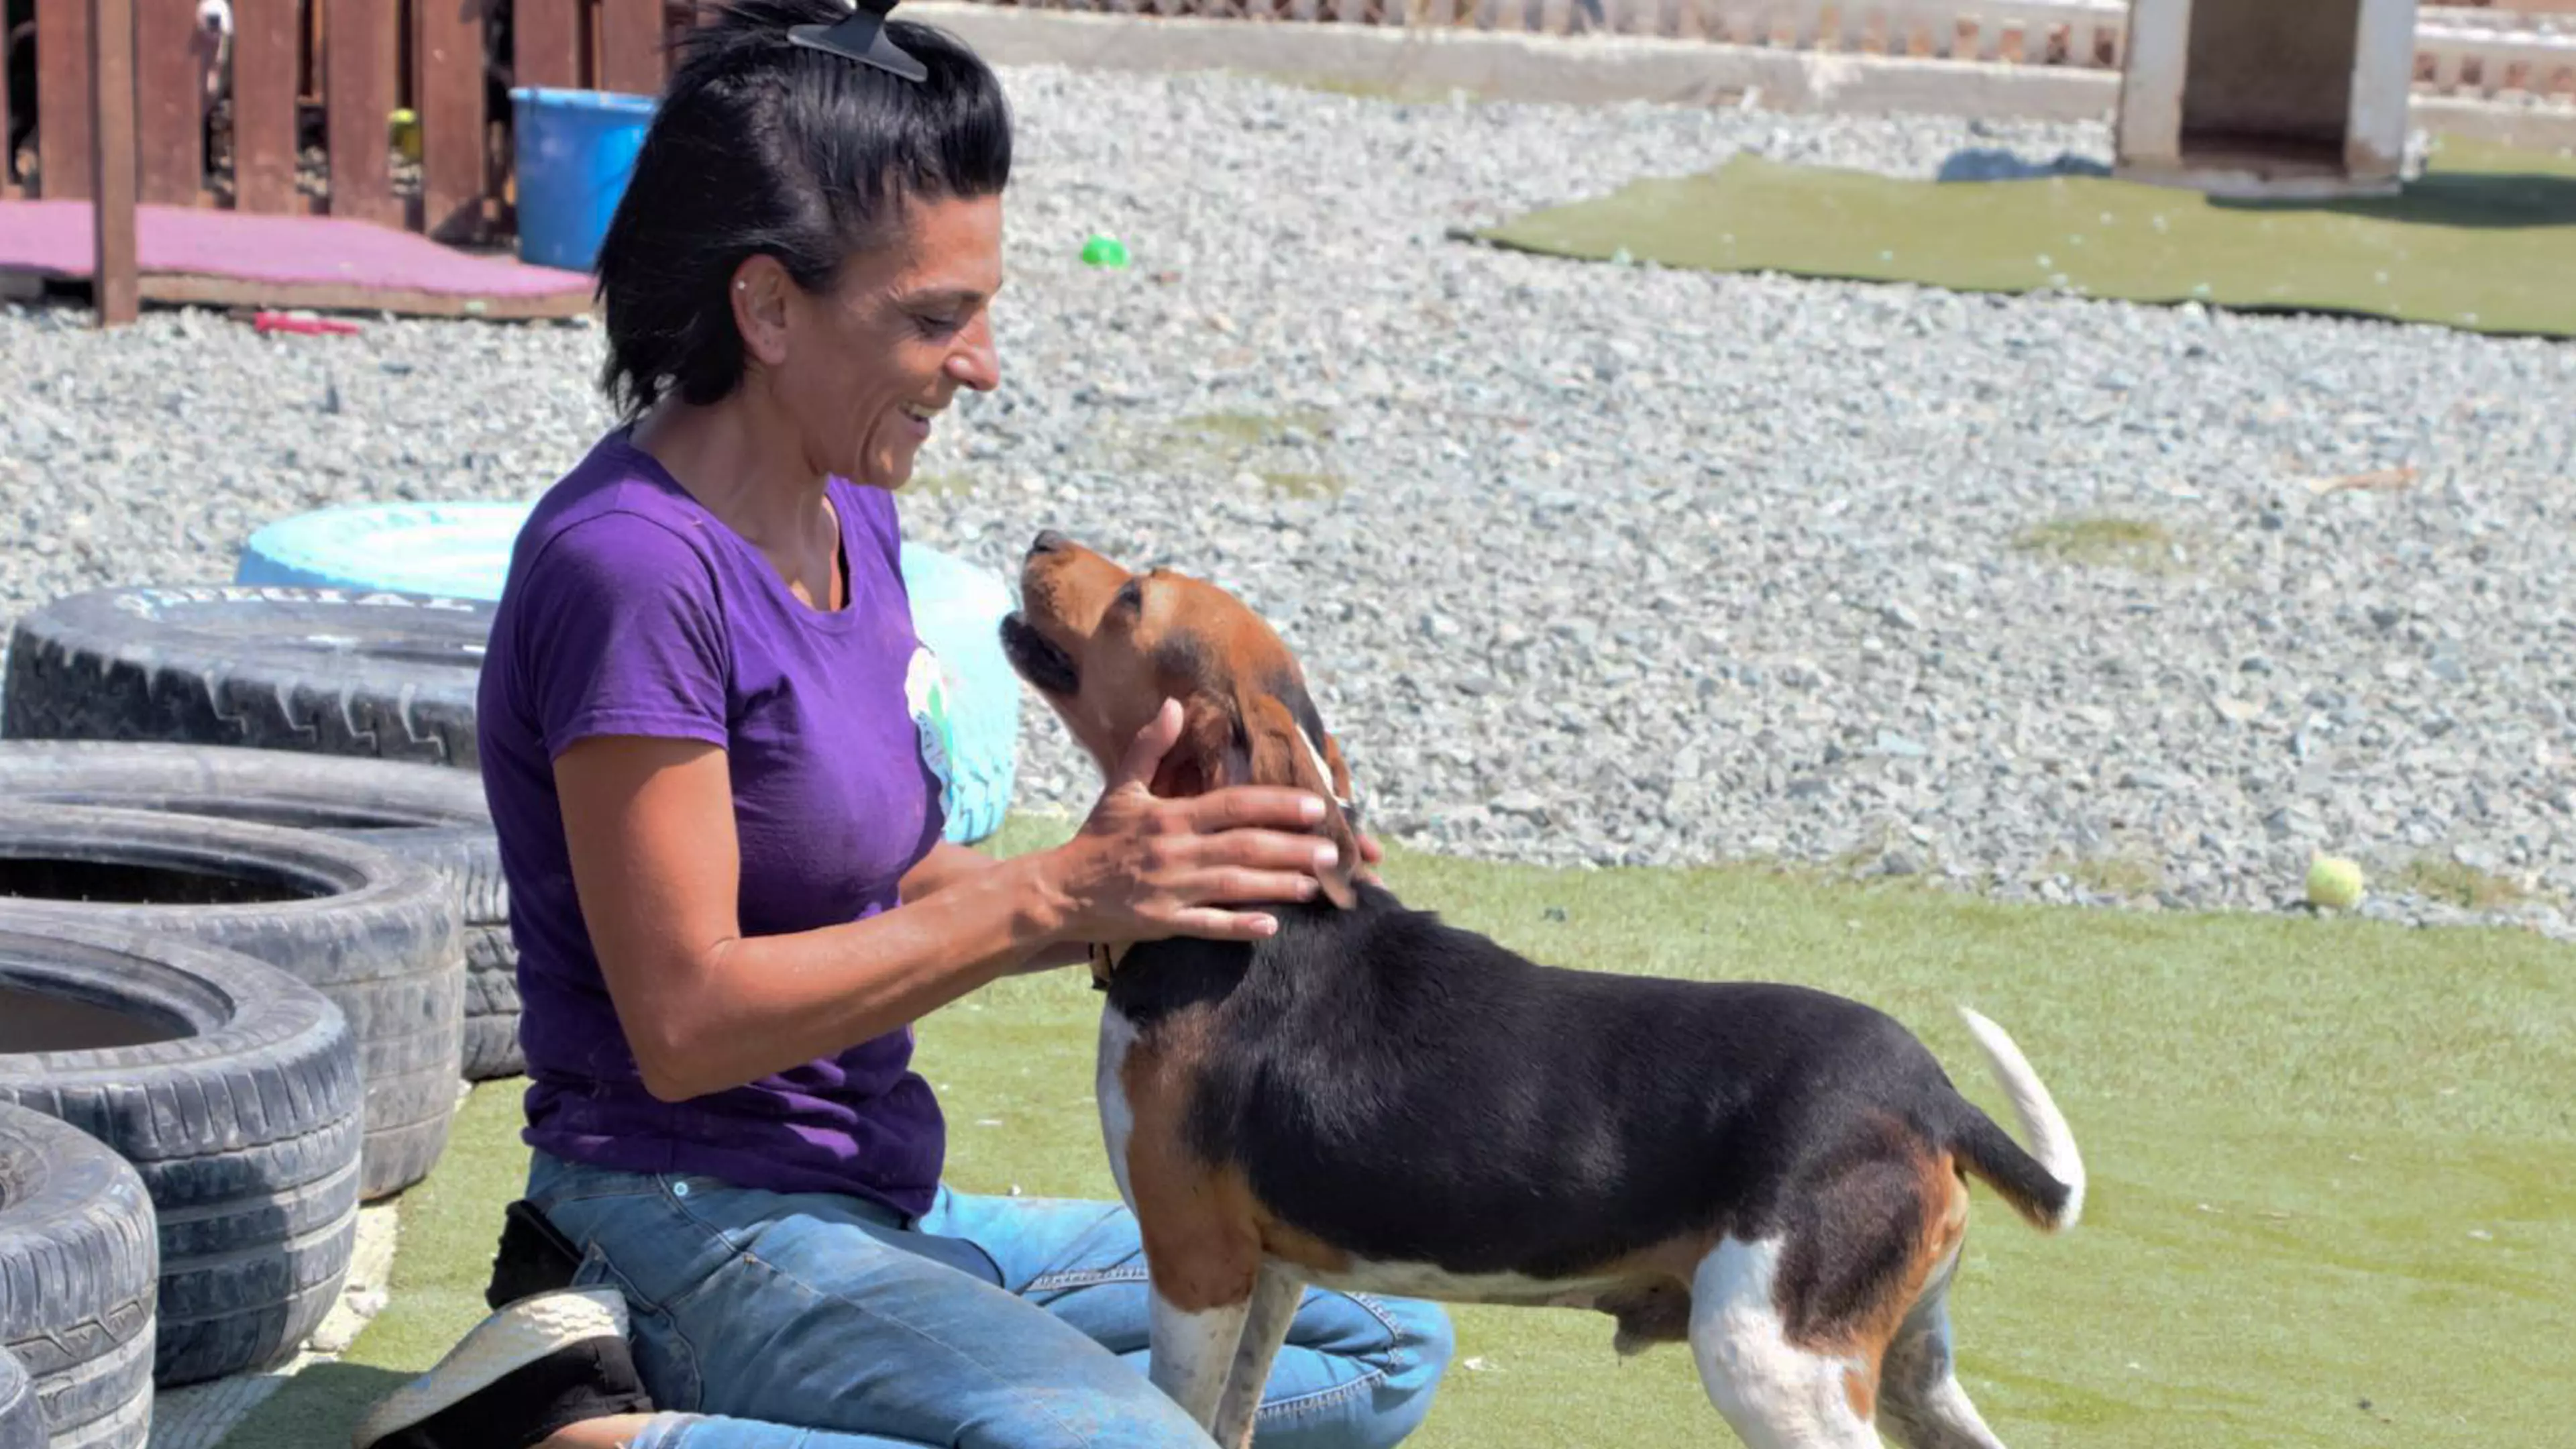 Dimitra Andreou now owns Doggy Warriors Rescue Sanctury and works there full time (